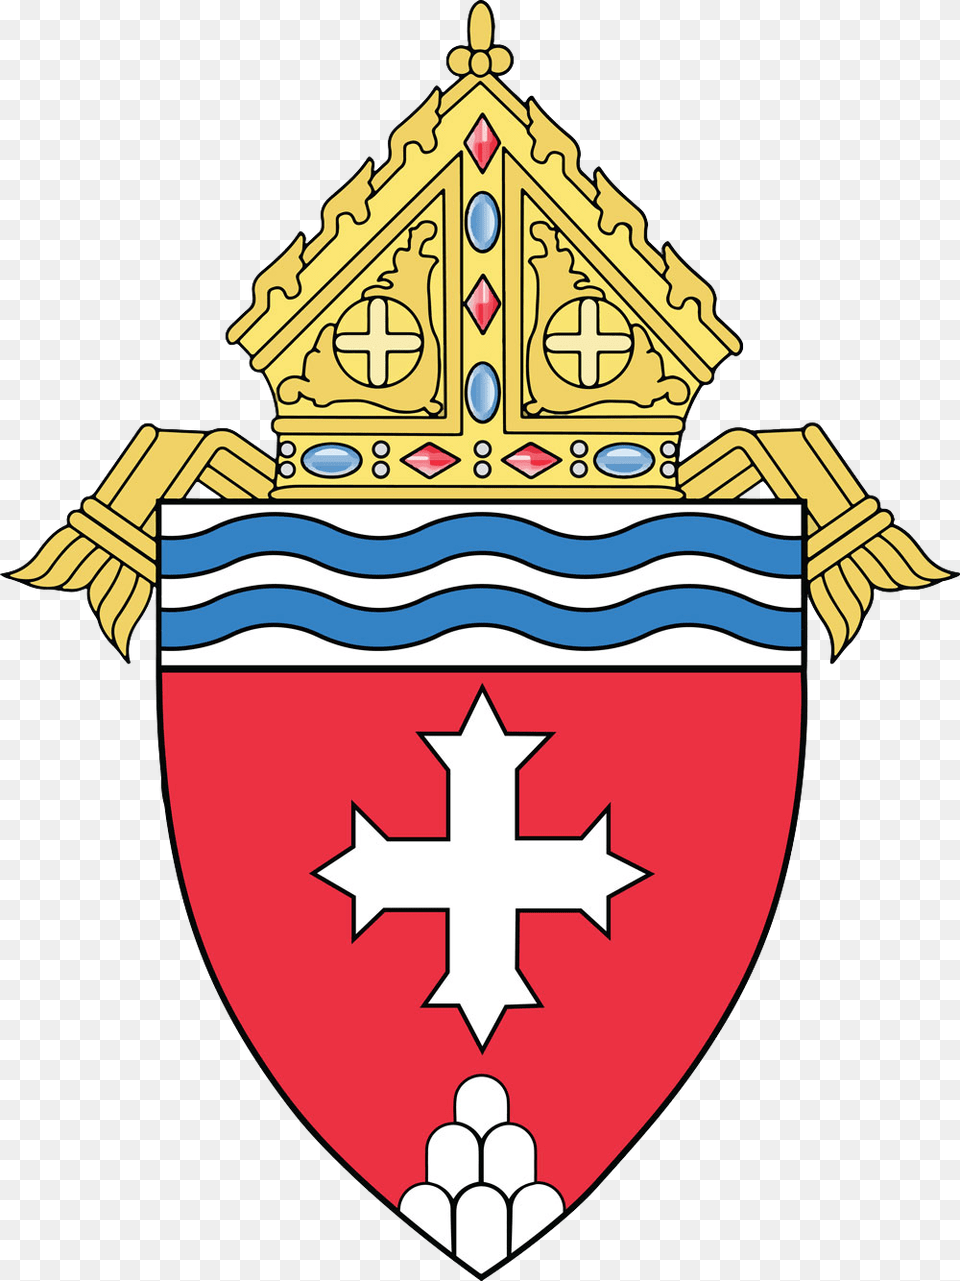 Diocese Of Memphis Coat Of Arms Catholic Diocese Of Memphis In Tennessee, Armor, Dynamite, Weapon, Shield Free Png Download